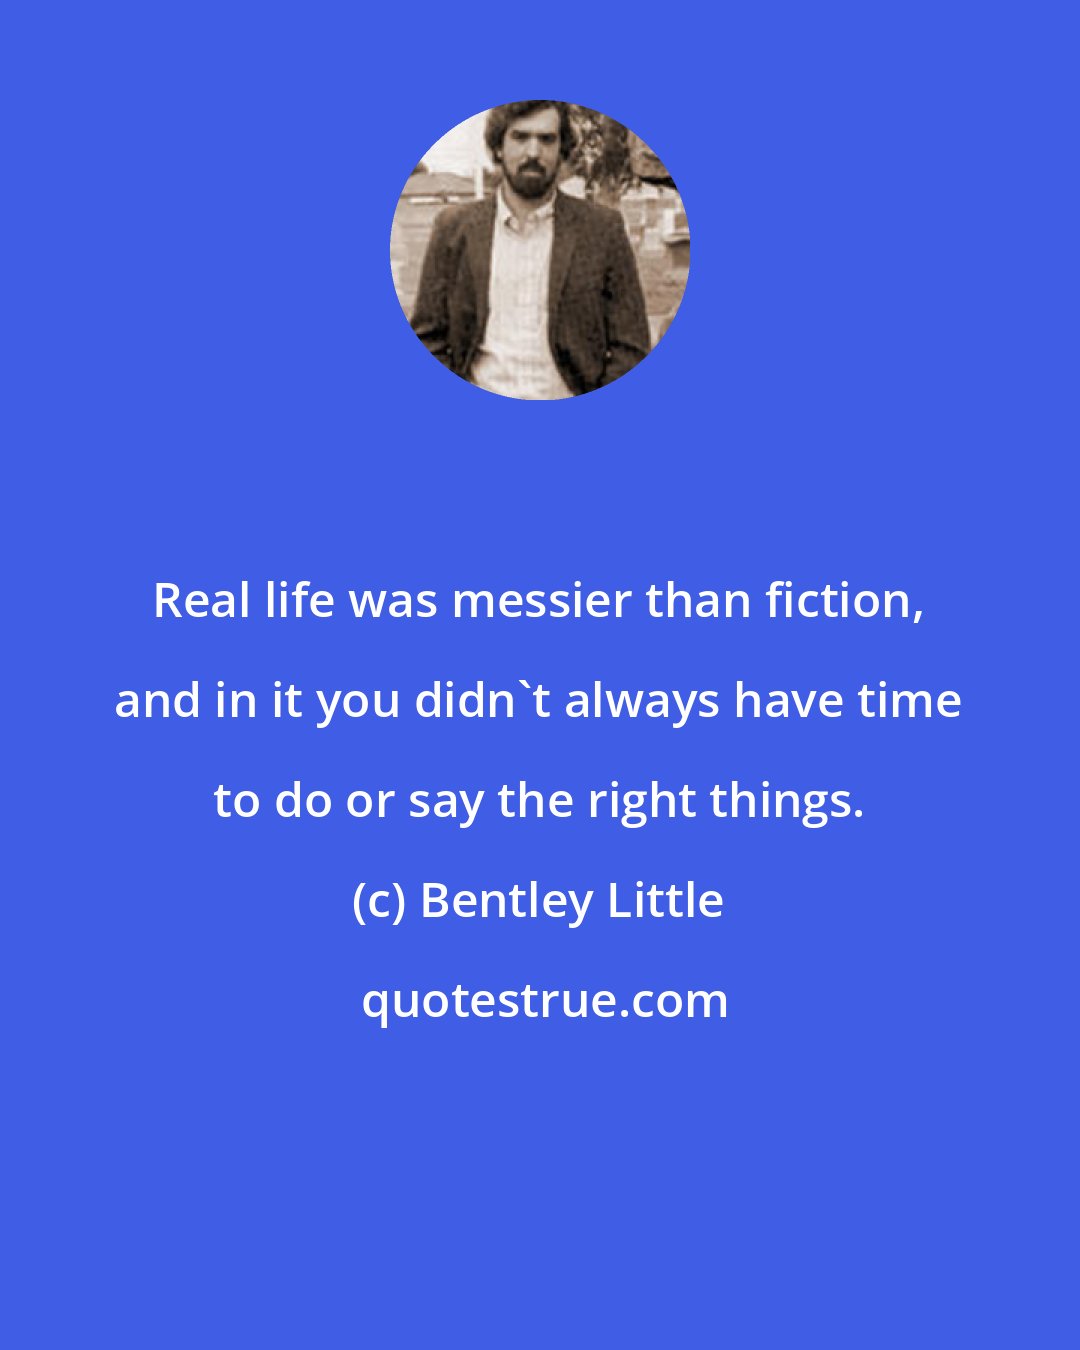 Bentley Little: Real life was messier than fiction, and in it you didn't always have time to do or say the right things.